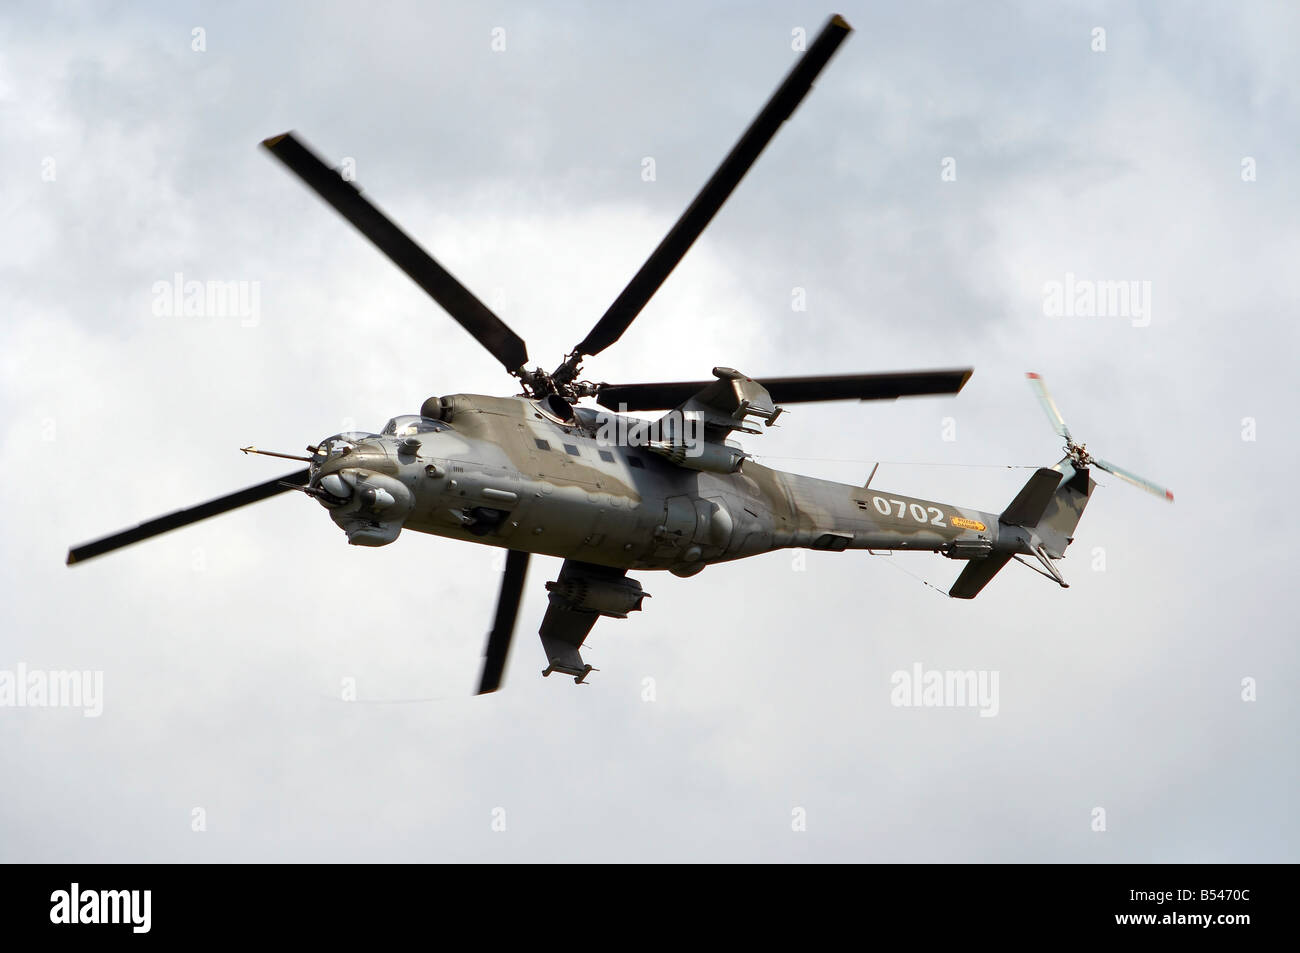 Shot of the flying gunship - armed forces - aircraft armament - model of the helicopter mi24 - mi35 Stock Photo